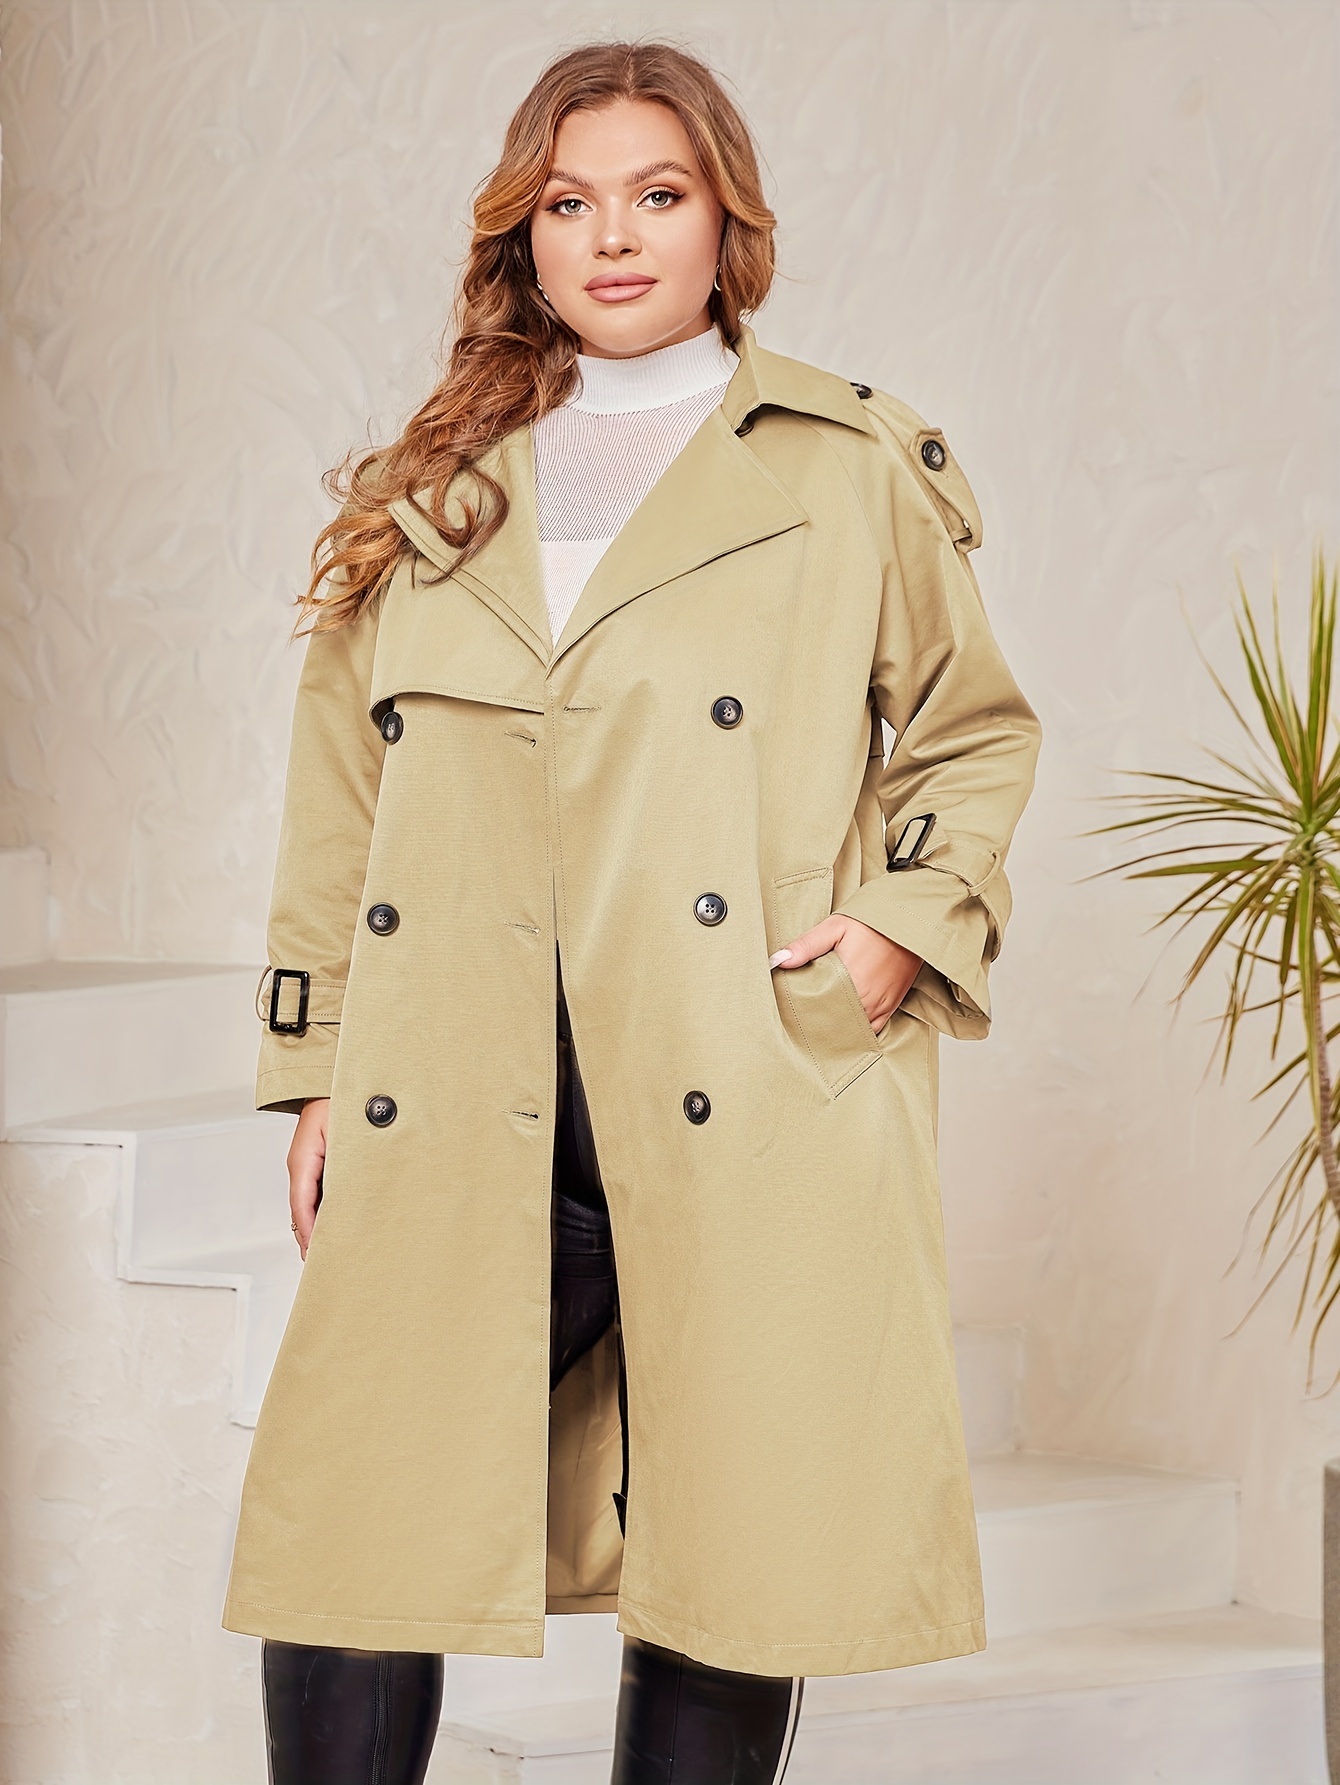 Long Winter Woolen Coat For Women Elegant Lapel Collar Trench Jackets Solid  Buttons Long Sleeve Casual Outerwear Tops